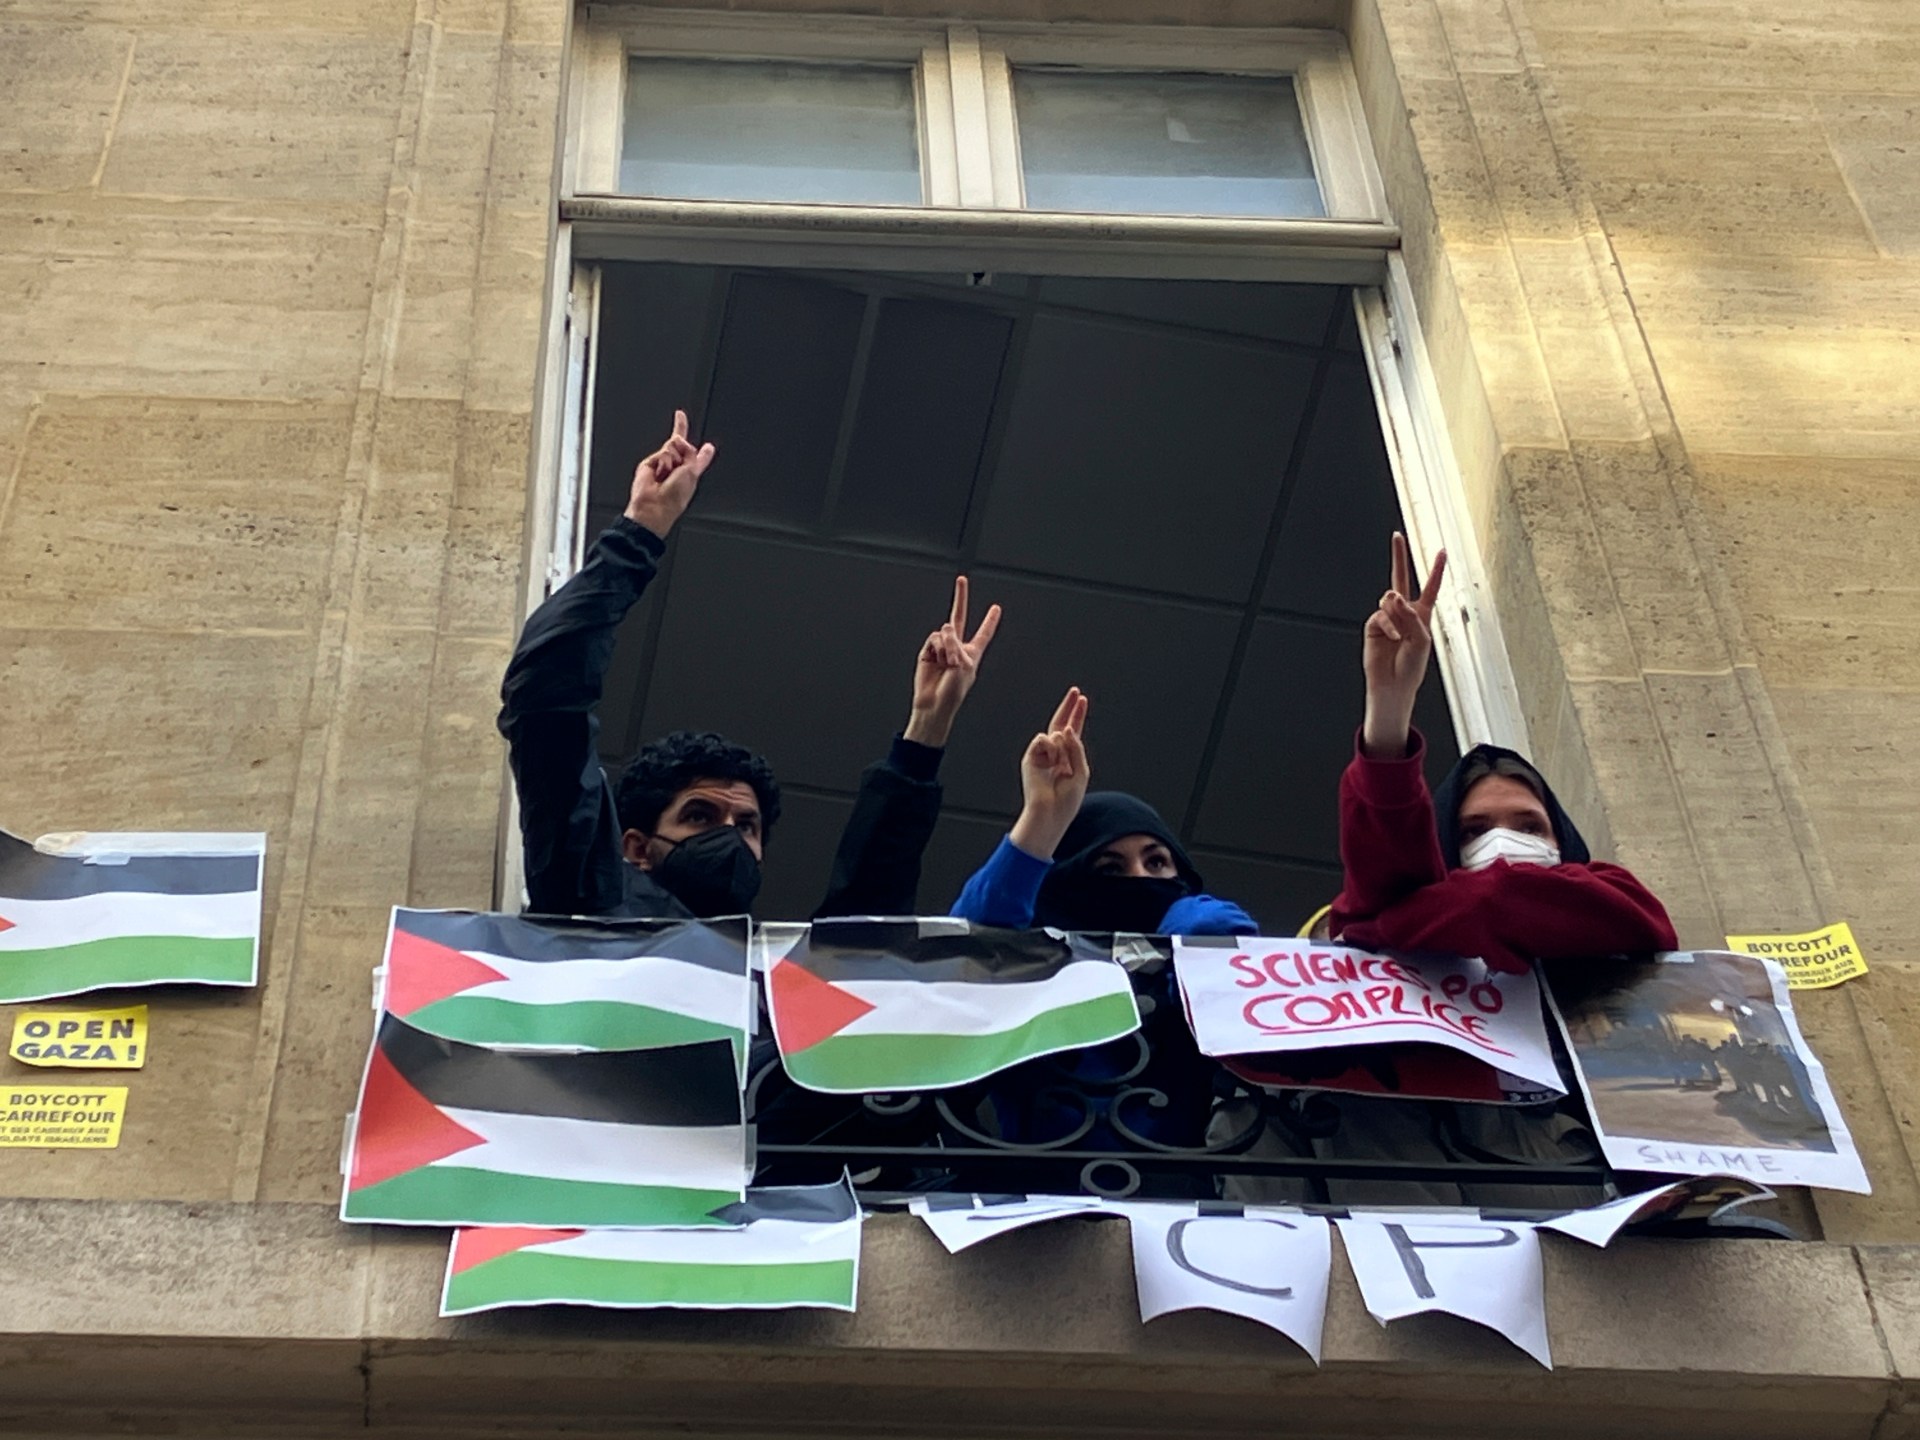 Protesters at Sciences Po in Paris rally against Israel’s attack on Gaza